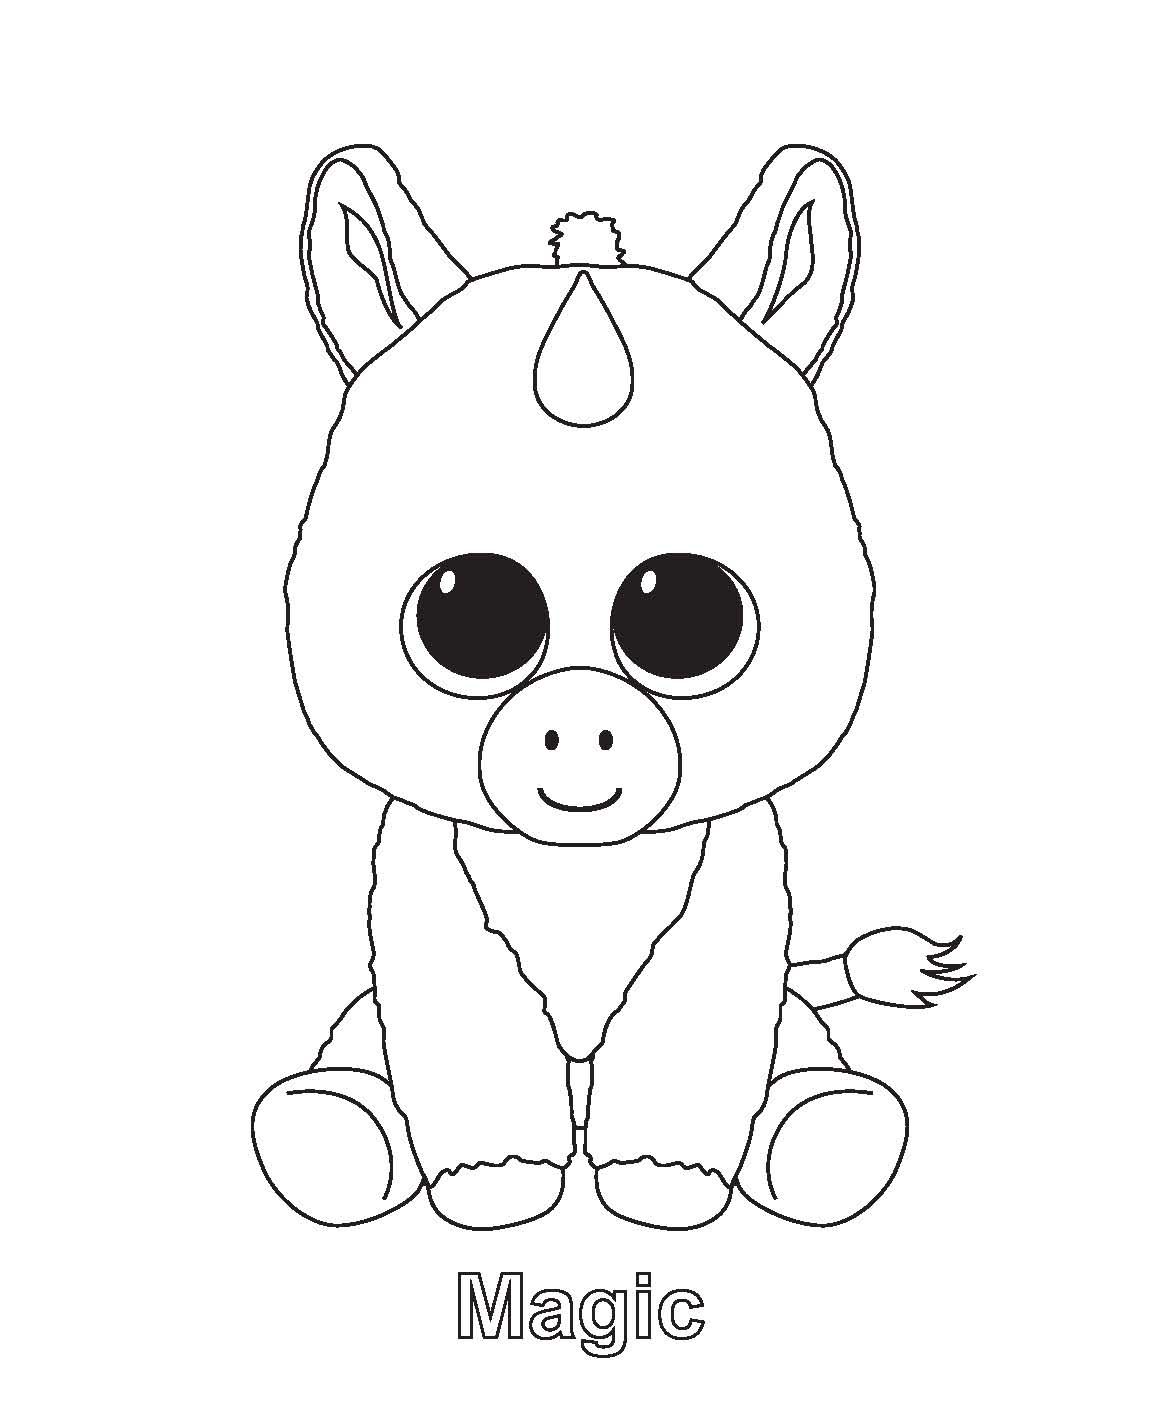 Gematigd Huisje optocht Beanie Boos Coloring Pages - Coloring Home